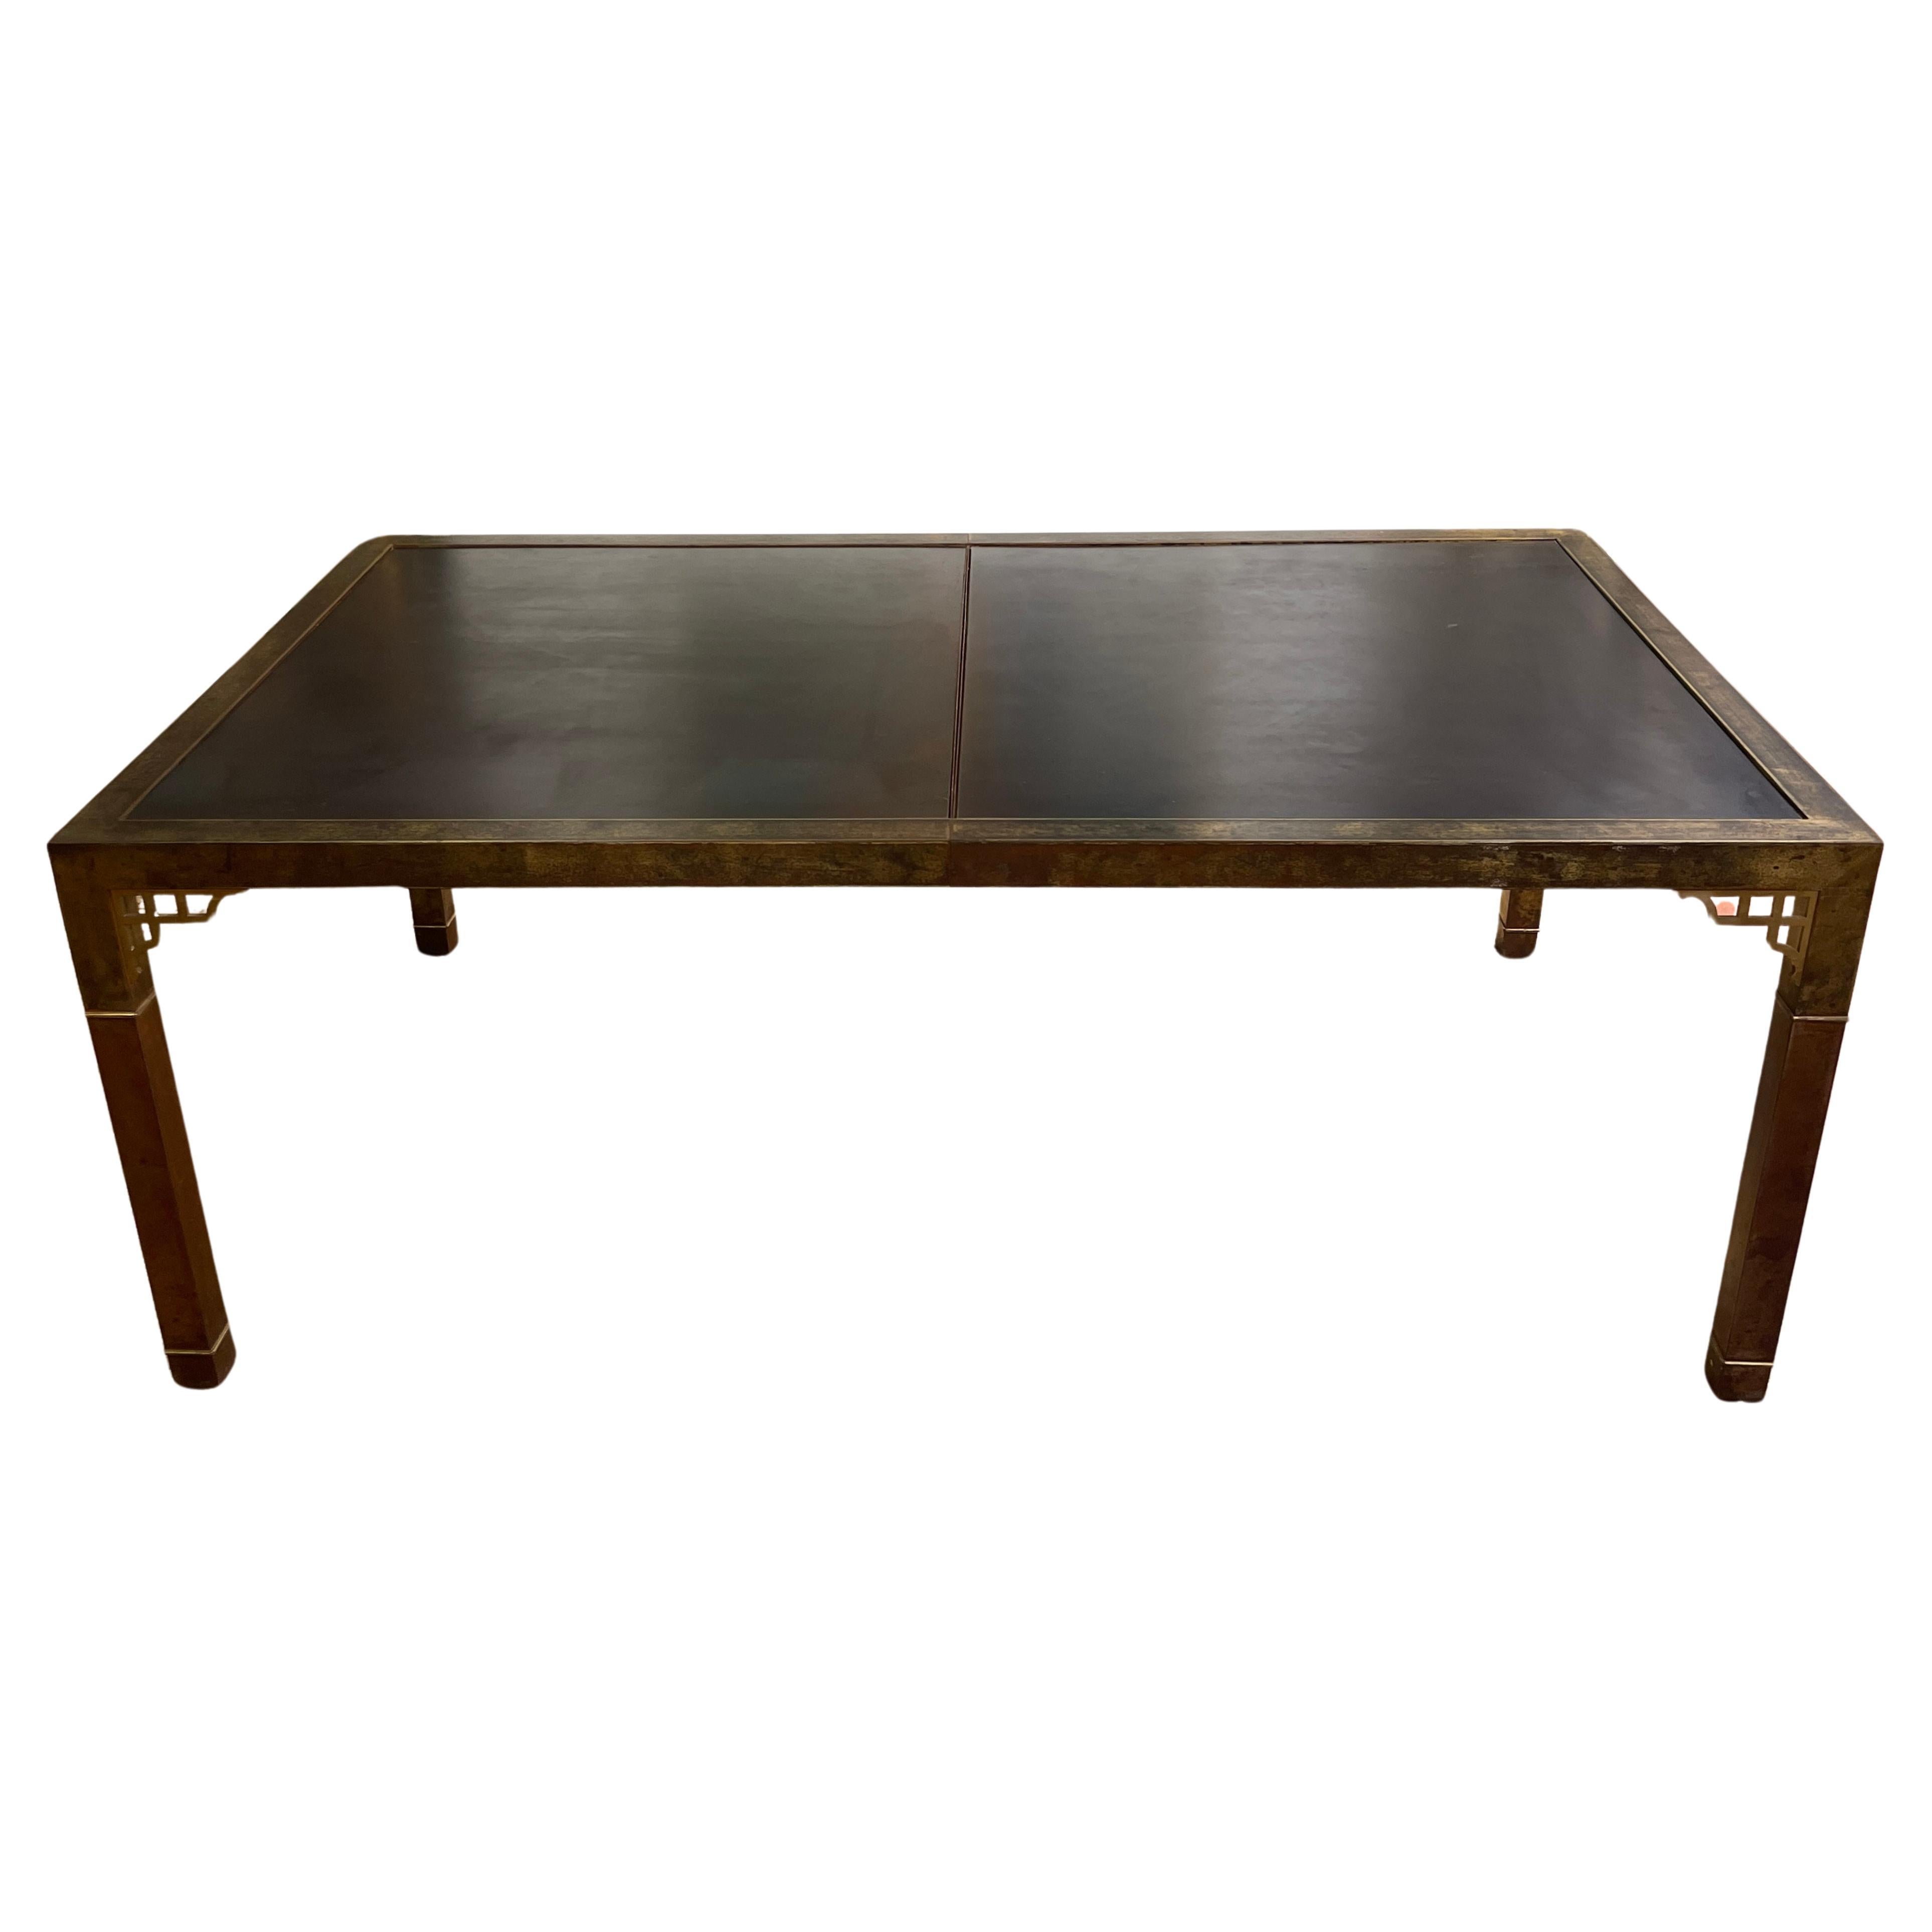 What are large dining tables called?